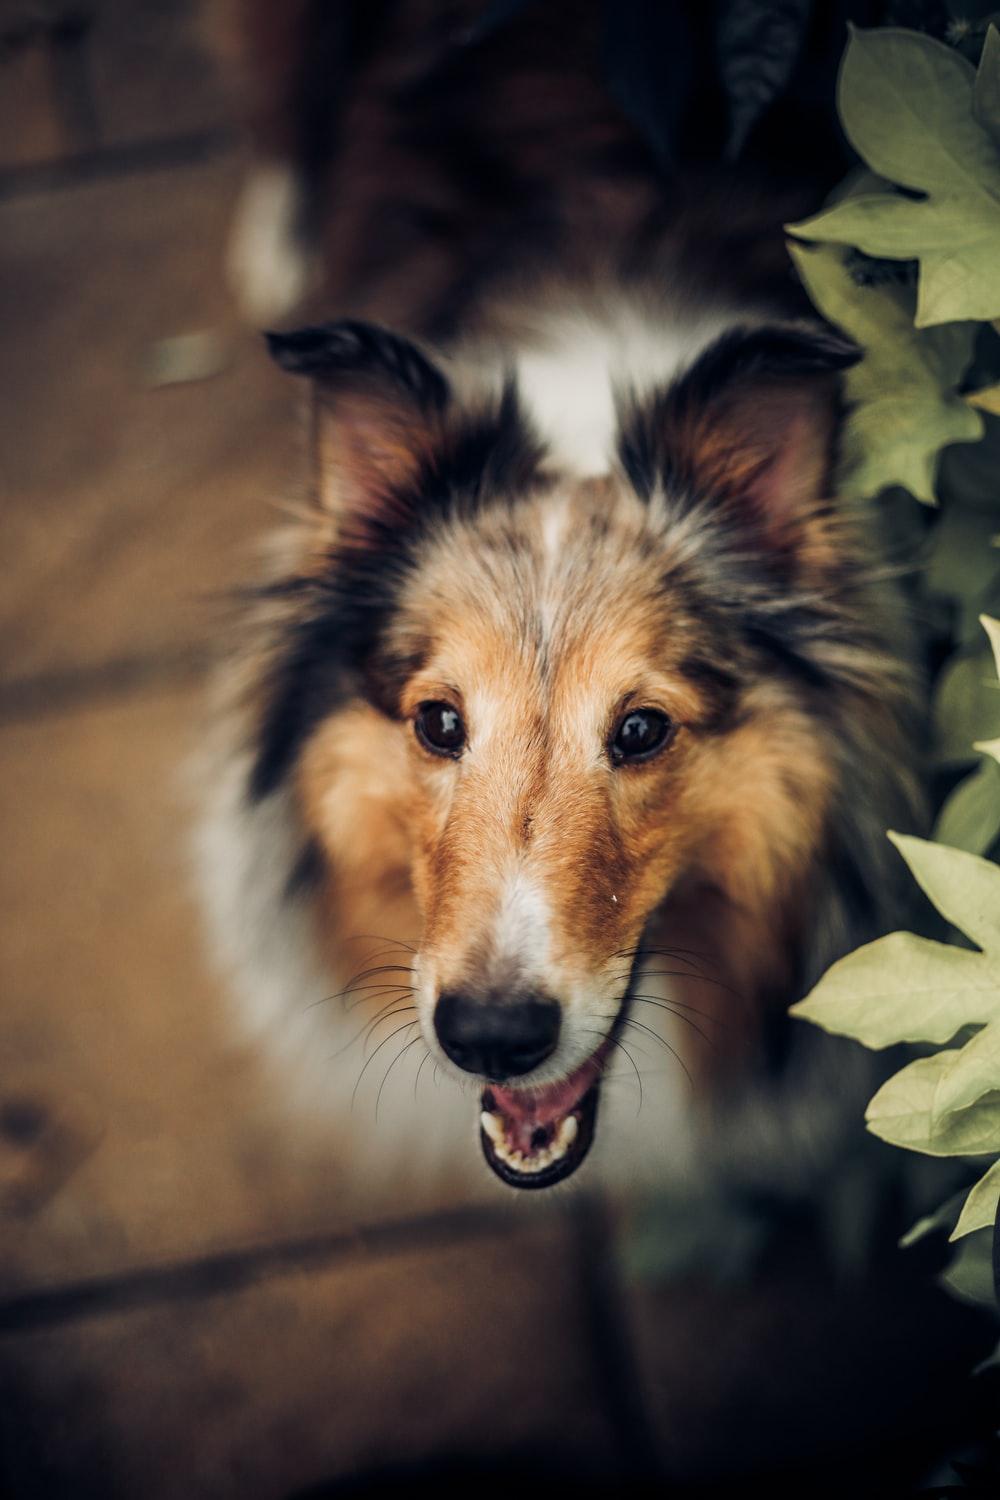 Rough Collie Picture. Download Free Image